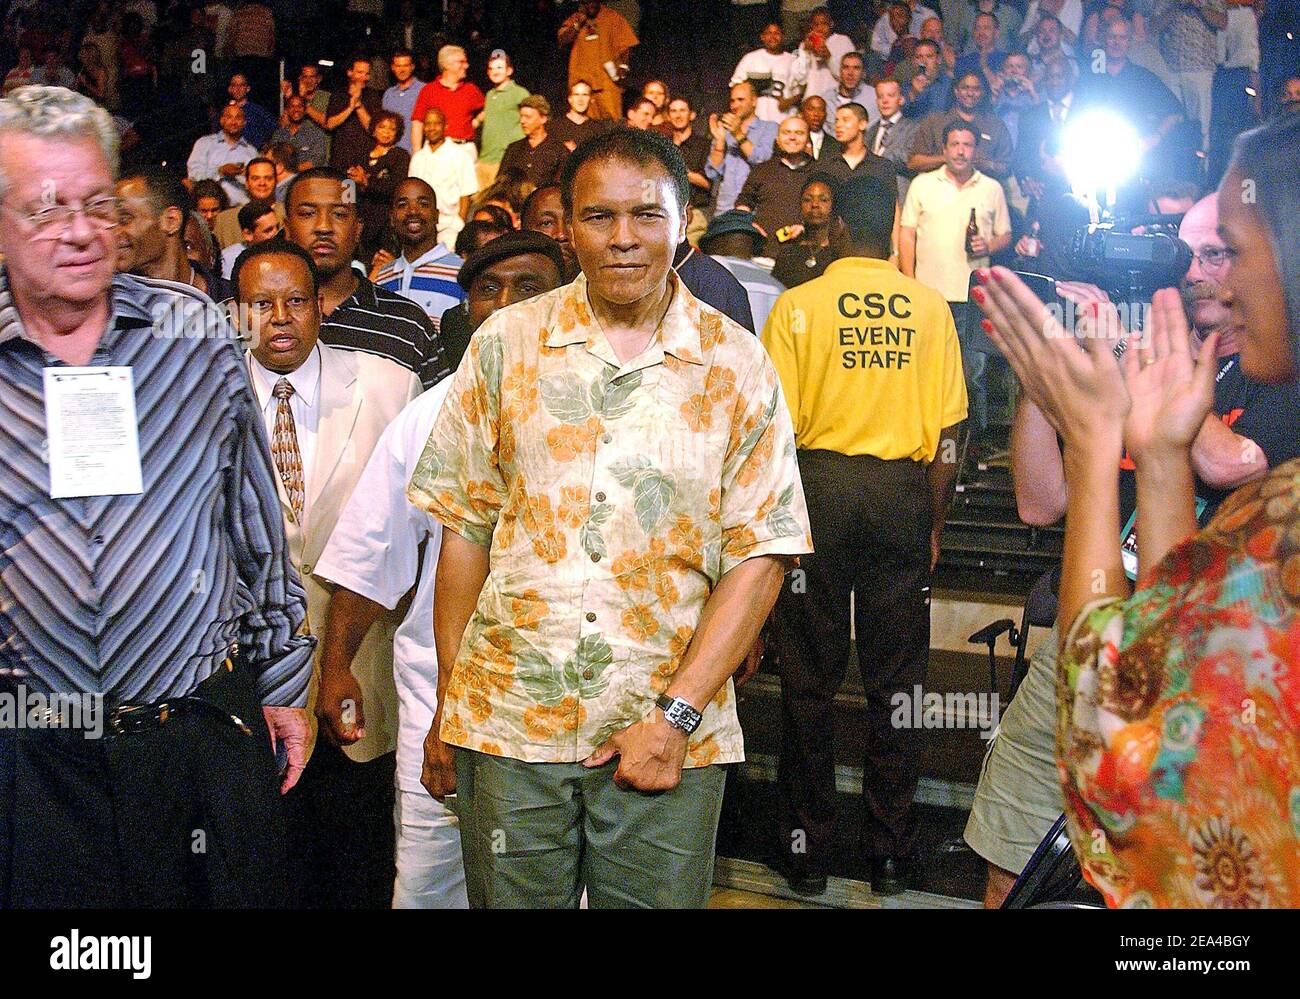 Boxing legend Muhammad Ali stepps down to the ring on June 11, 2005, in Washington, DC after congratulated his daughter Laila who won with a 3 round TKO against Erin Toughill for the WBC/WIBA Super Middleweight Championship Bout. Photo by Olivier Douliery/ABACA. Stock Photo